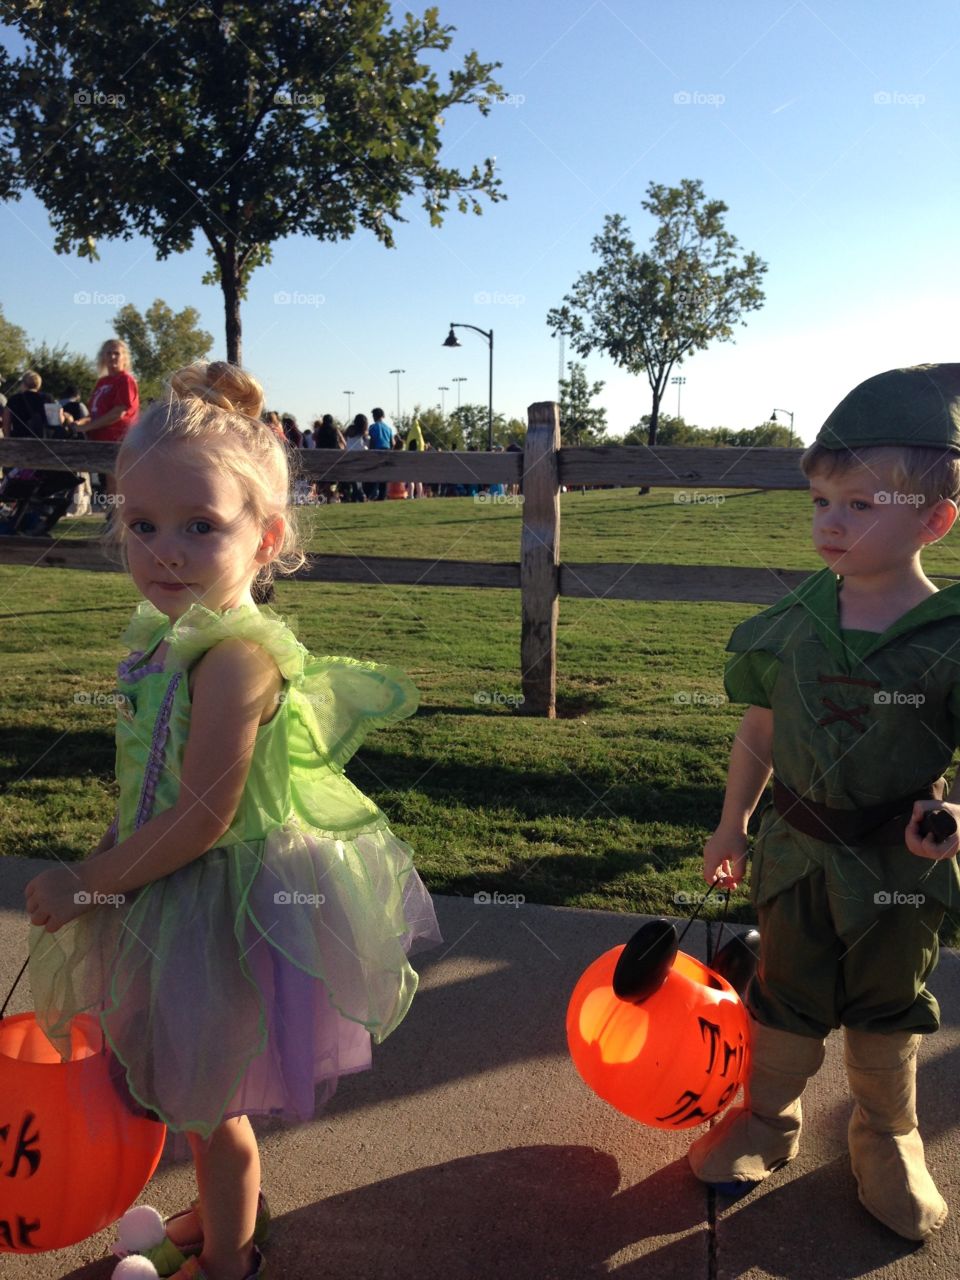 Twins trick or treating. Toddlers on Halloween. Peter Pan and Tinker Bell